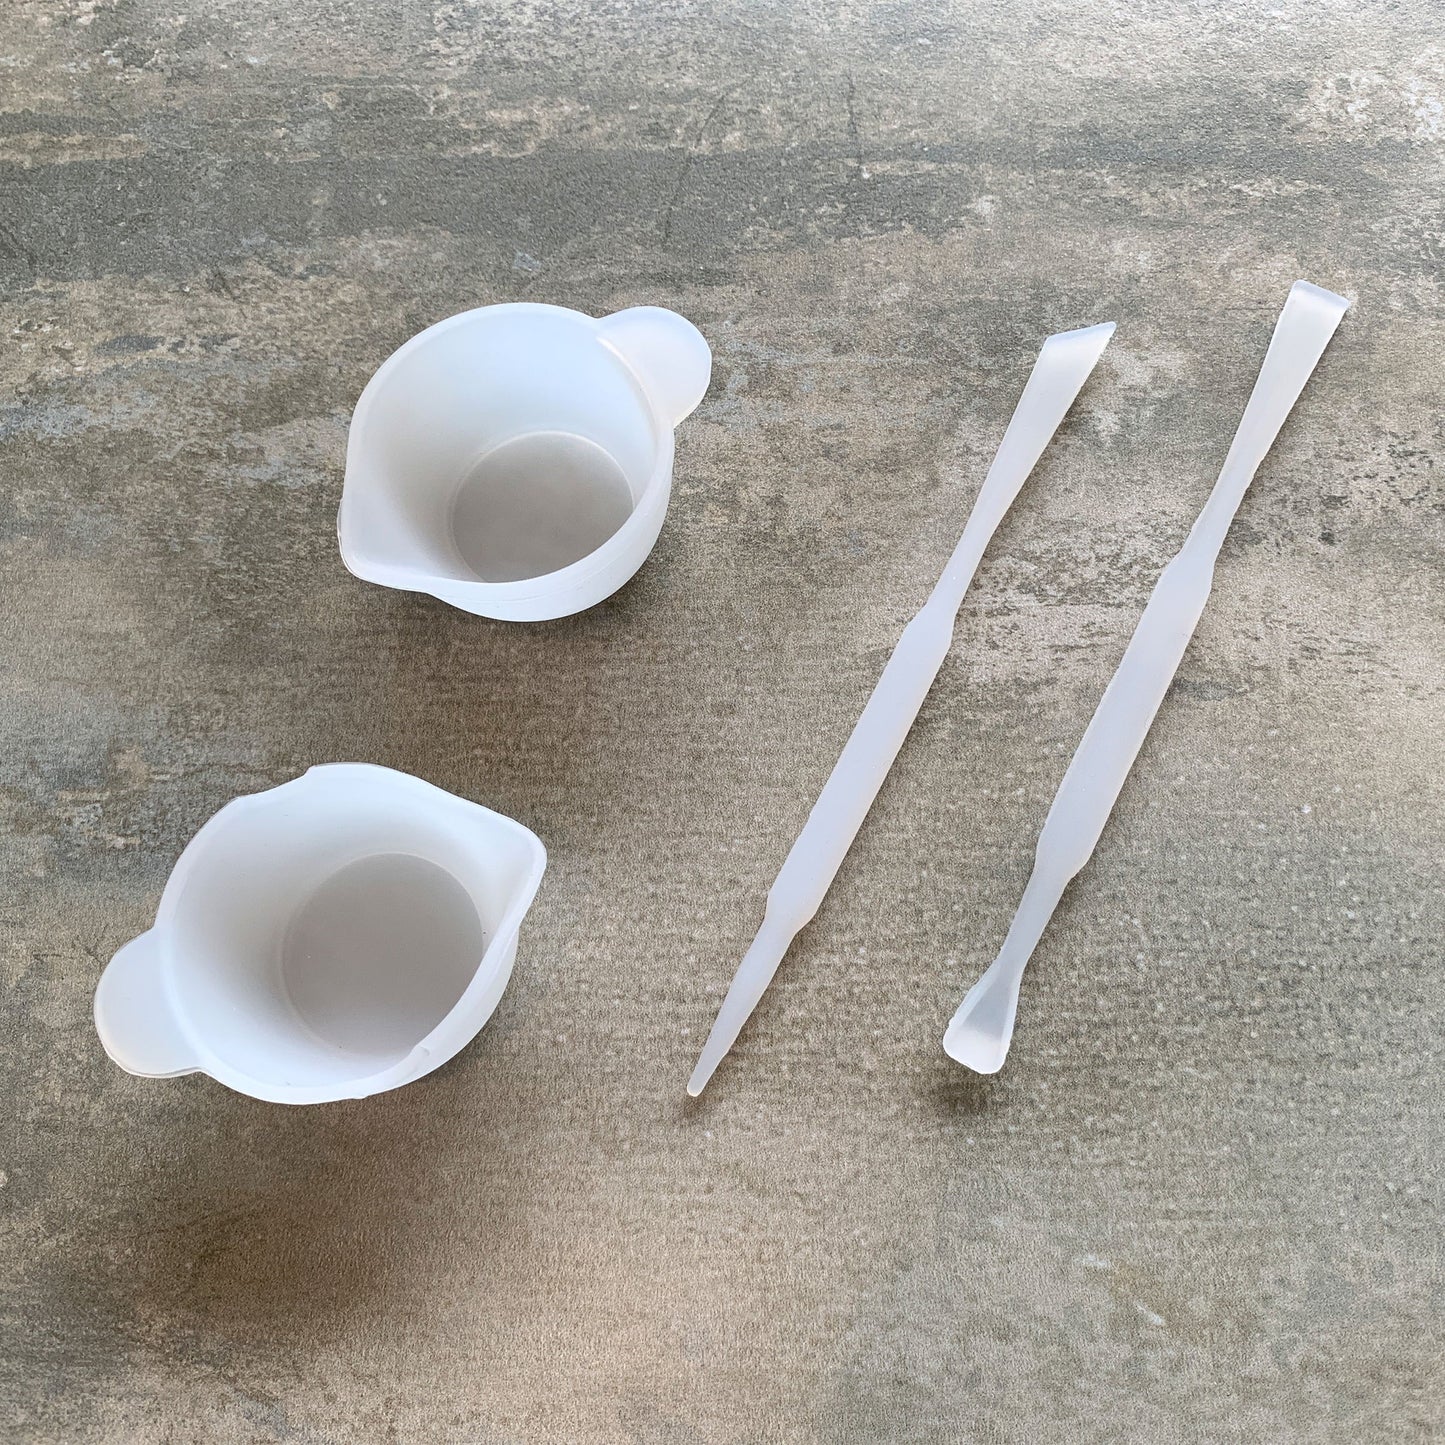 Resin Craft Silicone Mixing Tools